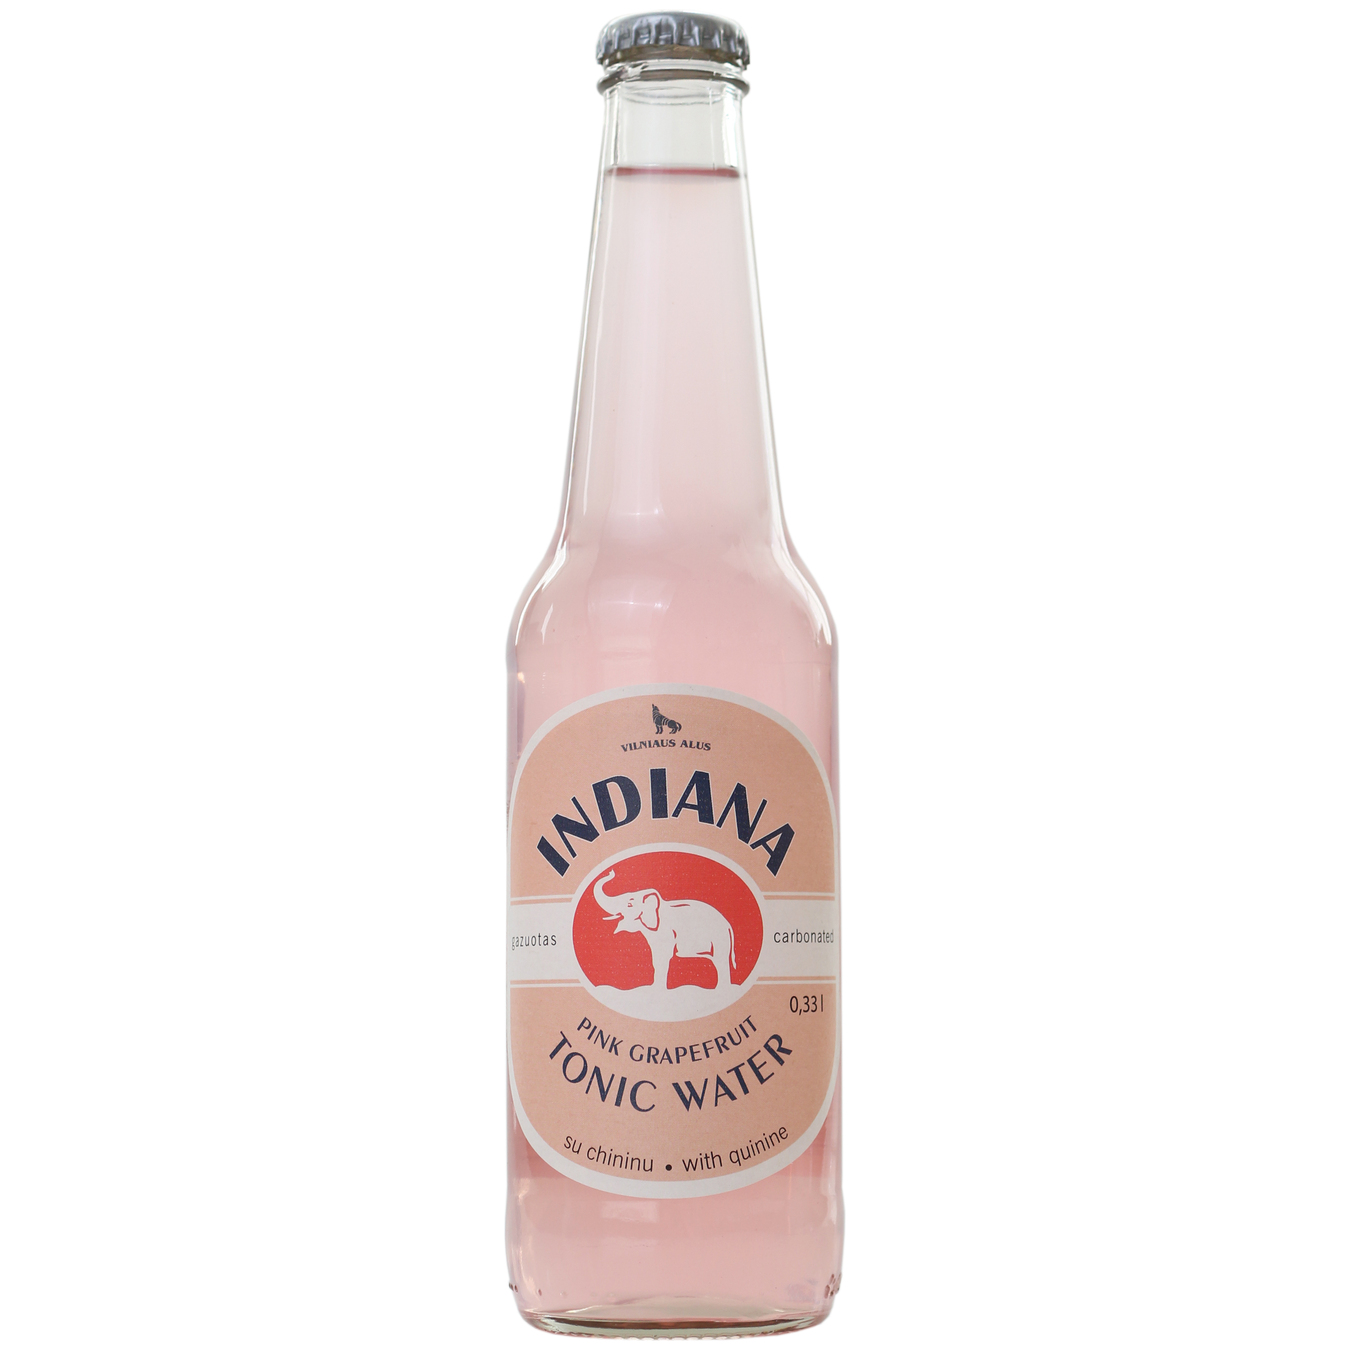 Carbonated drink Indiana tonic pink grapefruit 0.33l glass